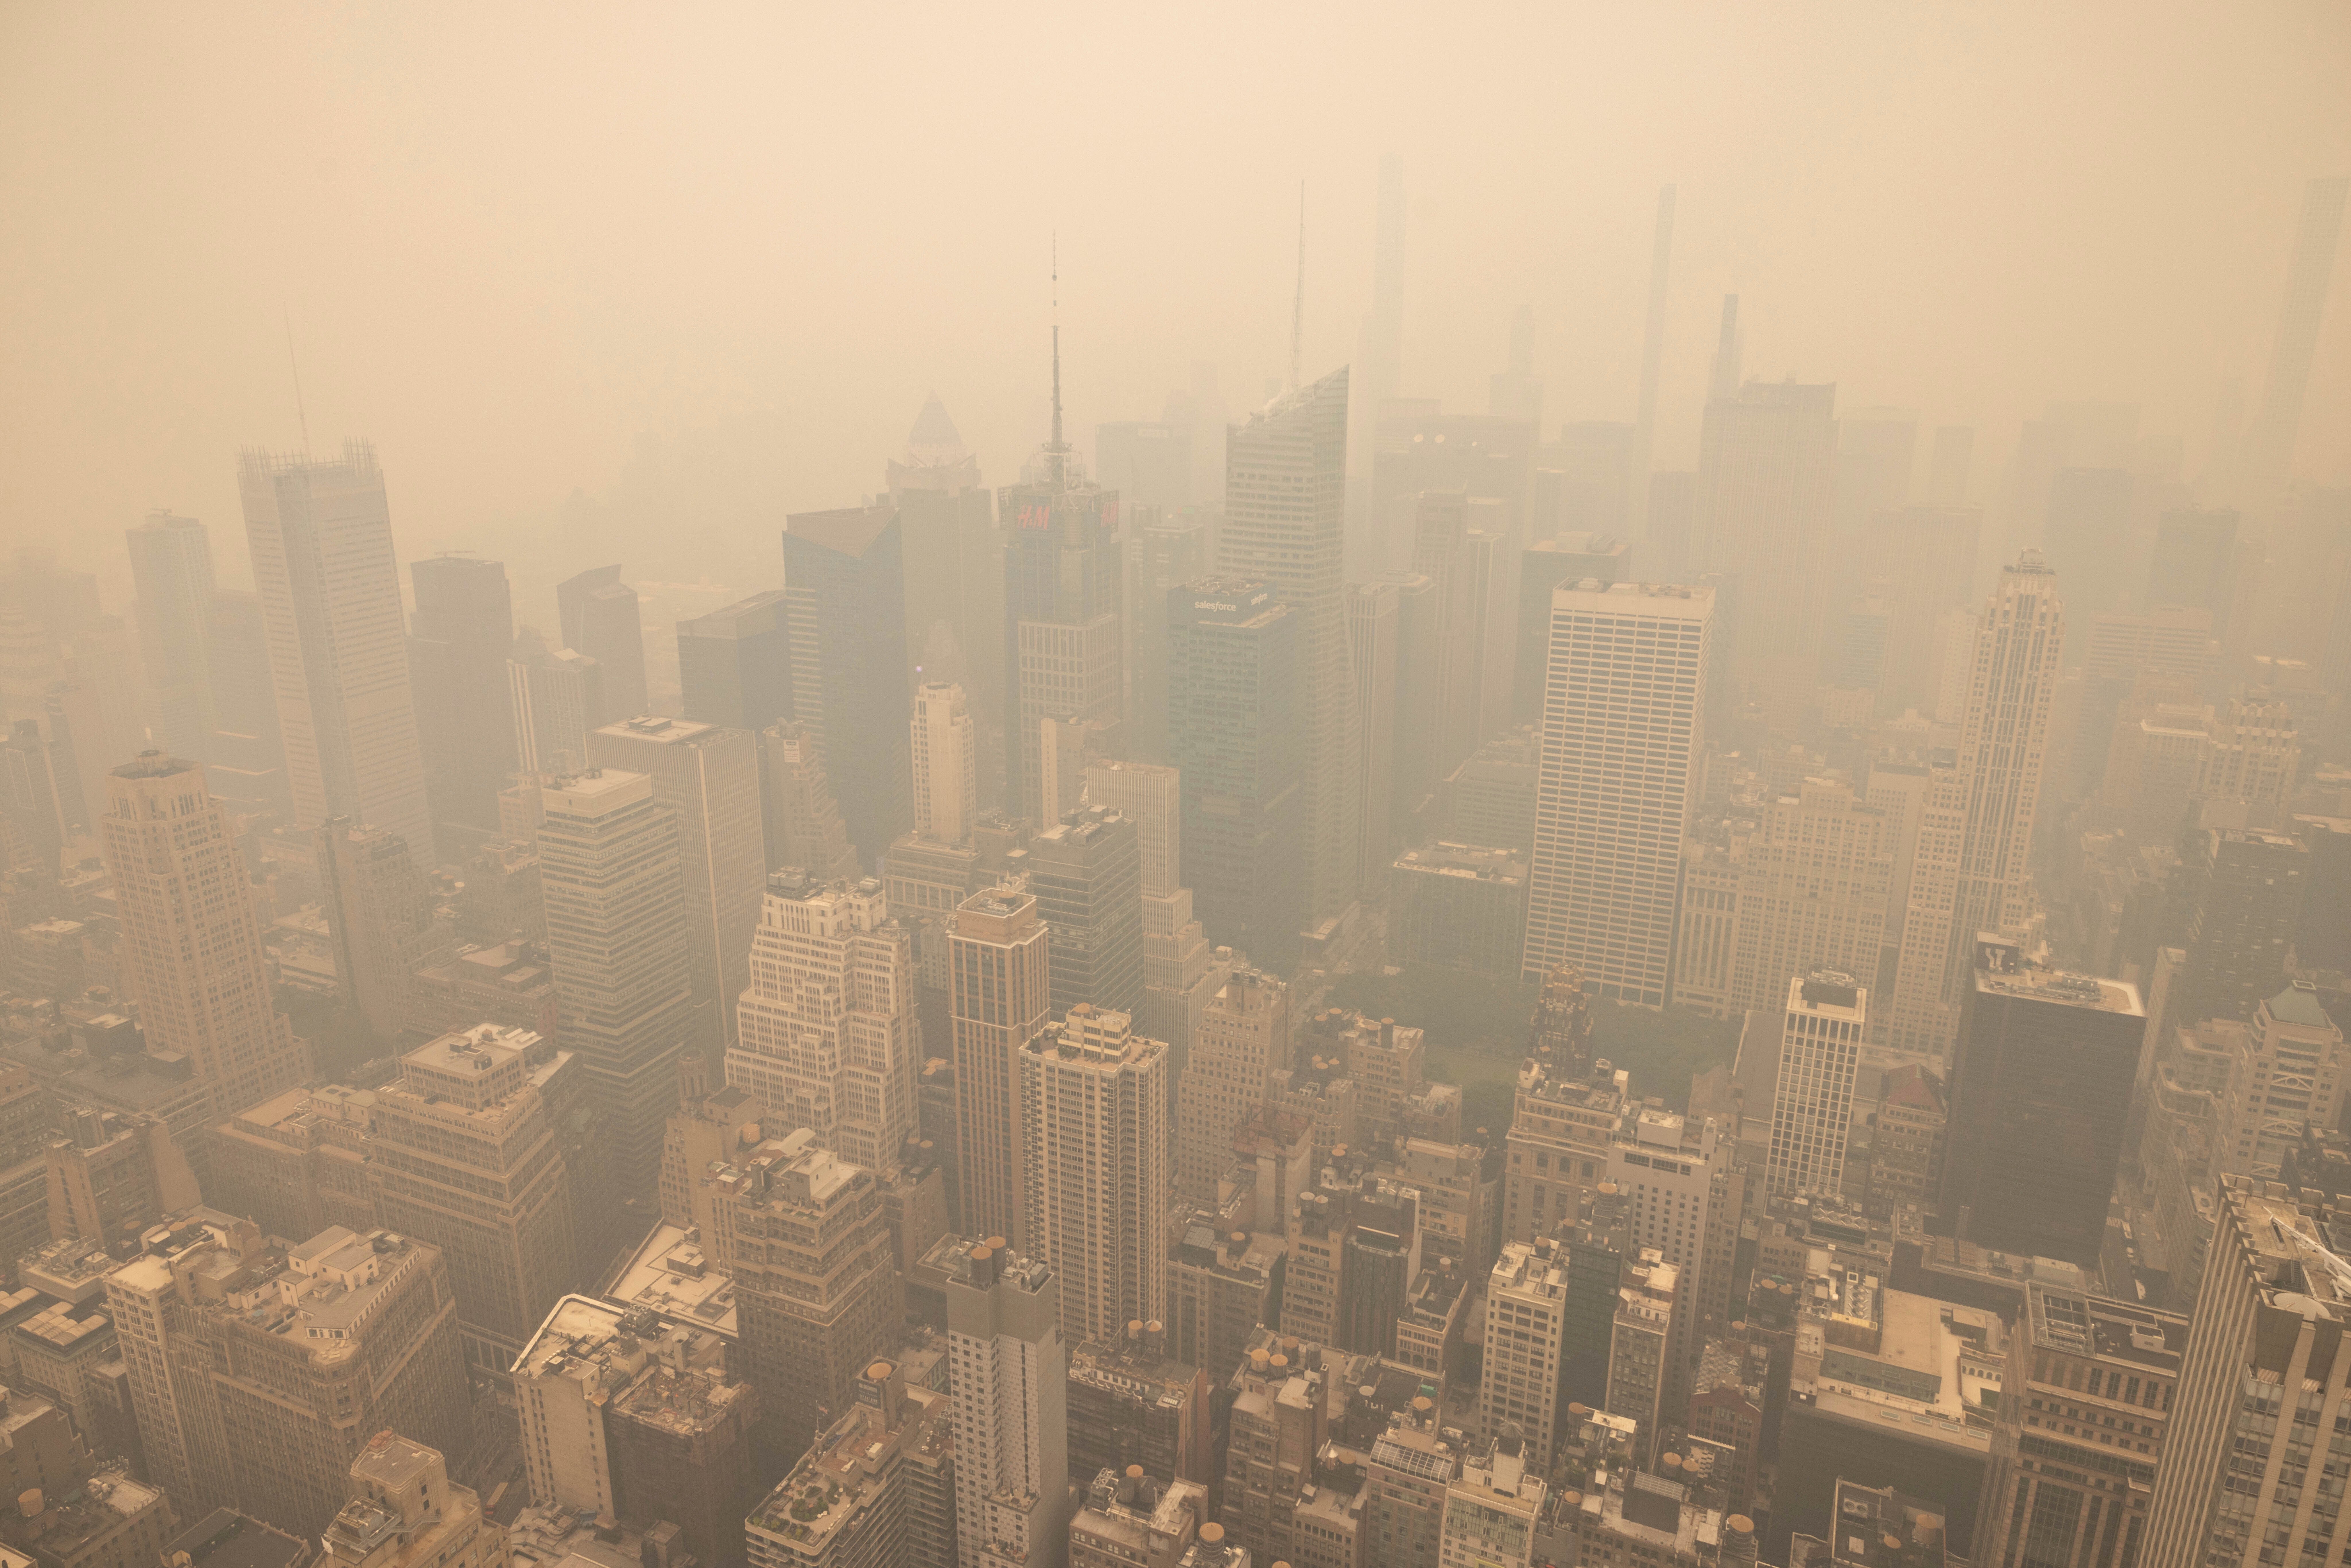 New York City is covered in haze as photographed from the Empire State Building observatory on Wednesday